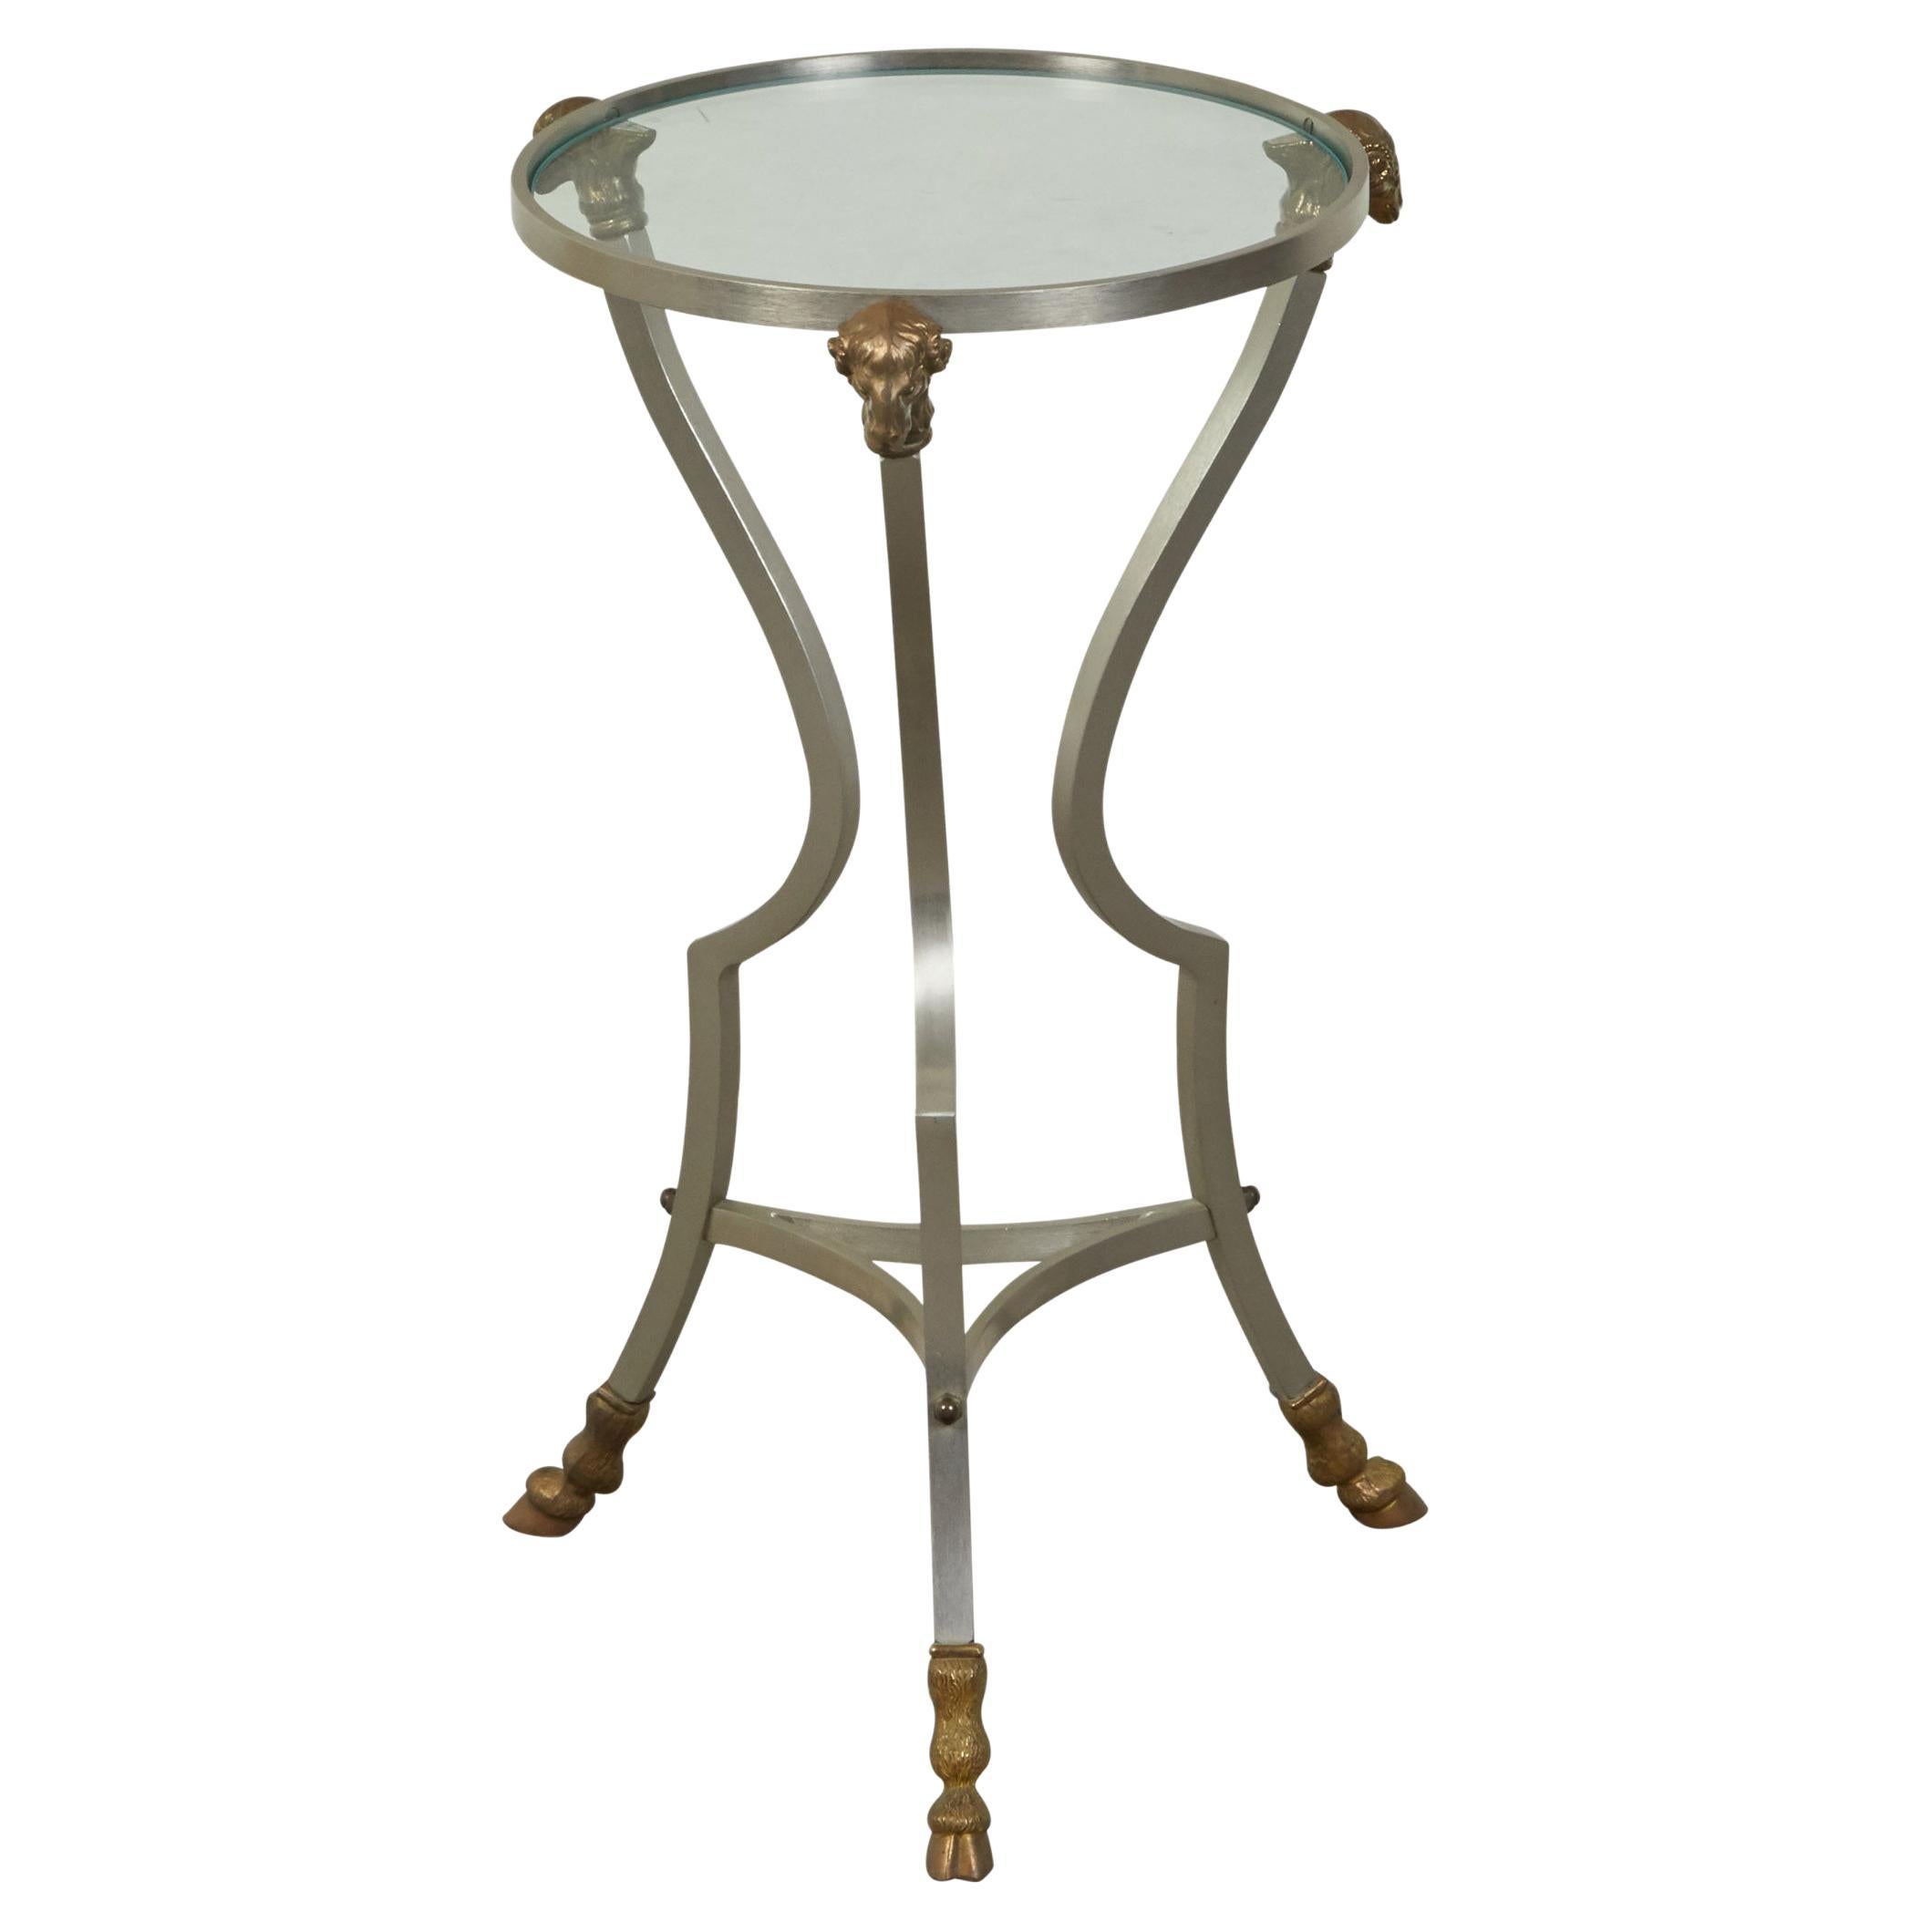 Italian Midcentury Directoire Style Side Table with Rams' Heads and Hoof Feet